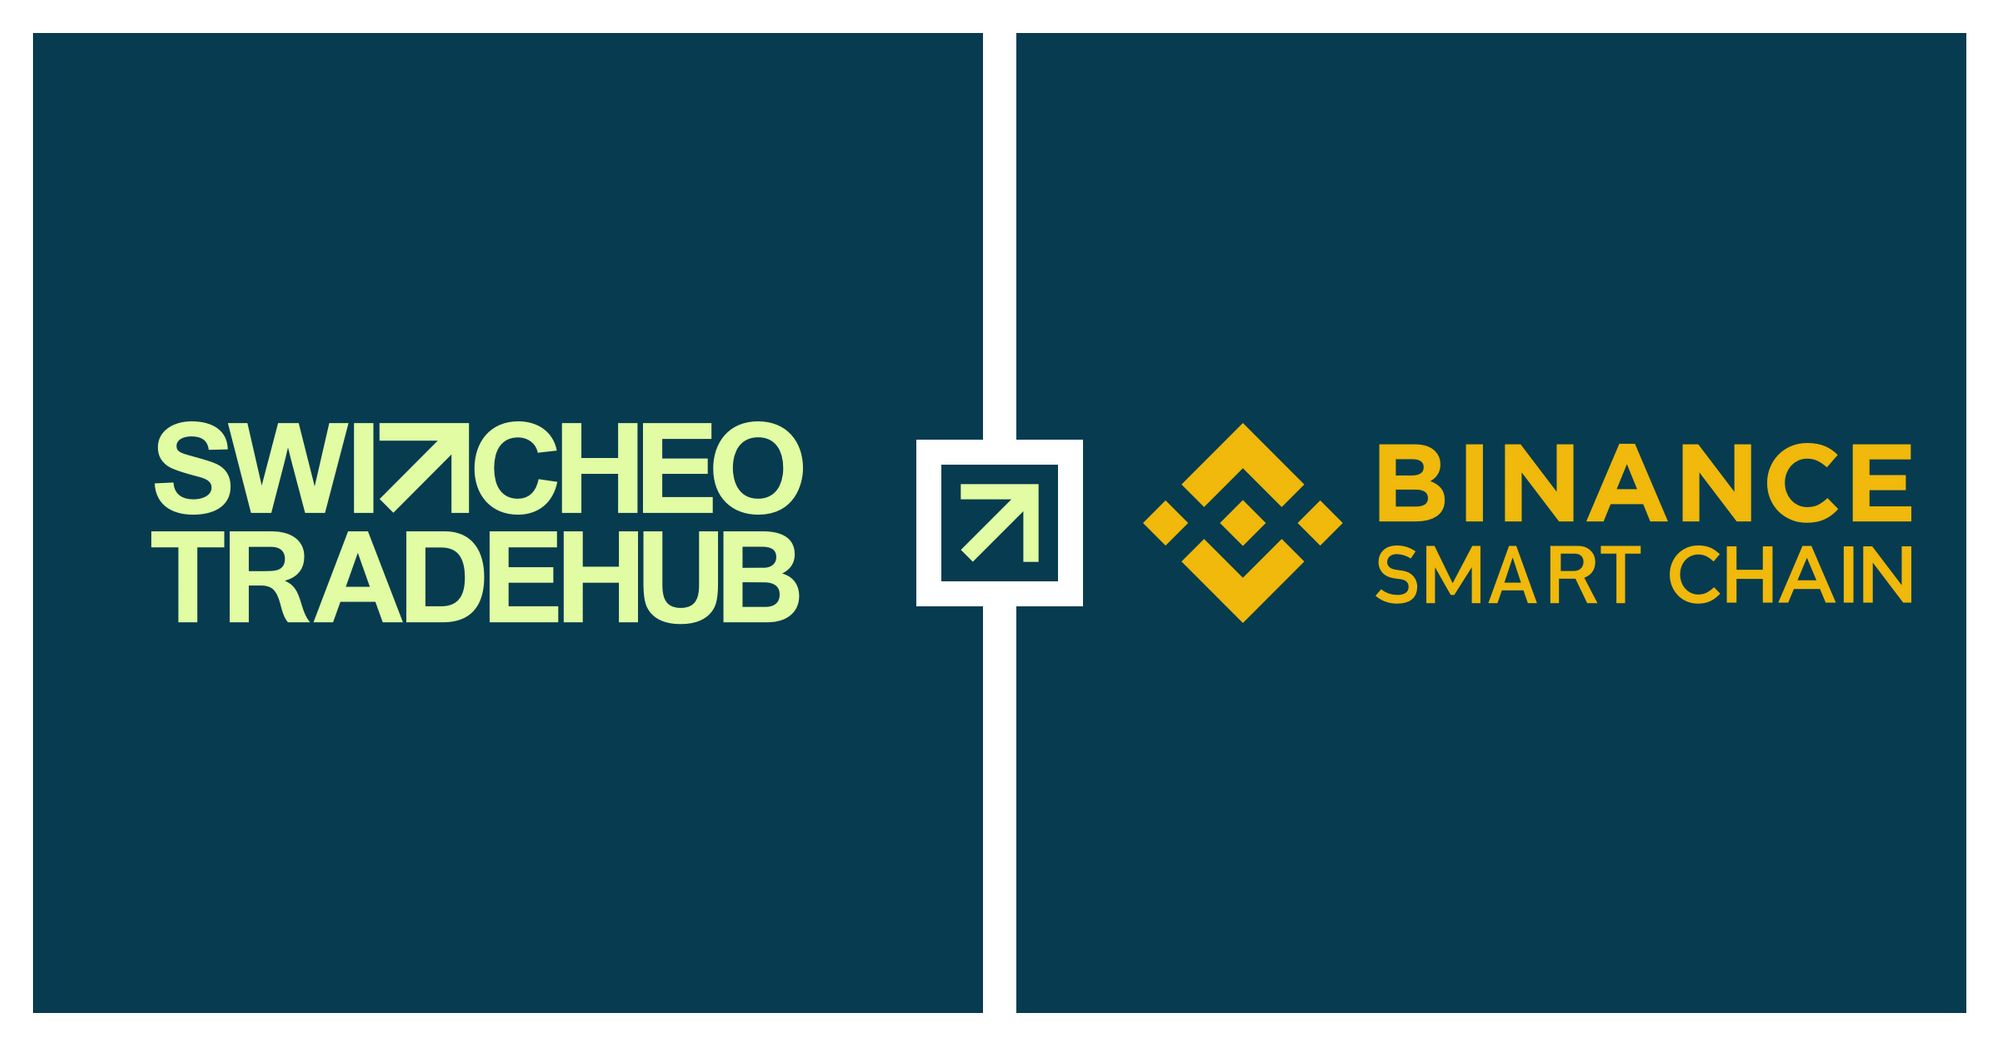 Switcheo Is Joining the Binance Smart Chain Family.